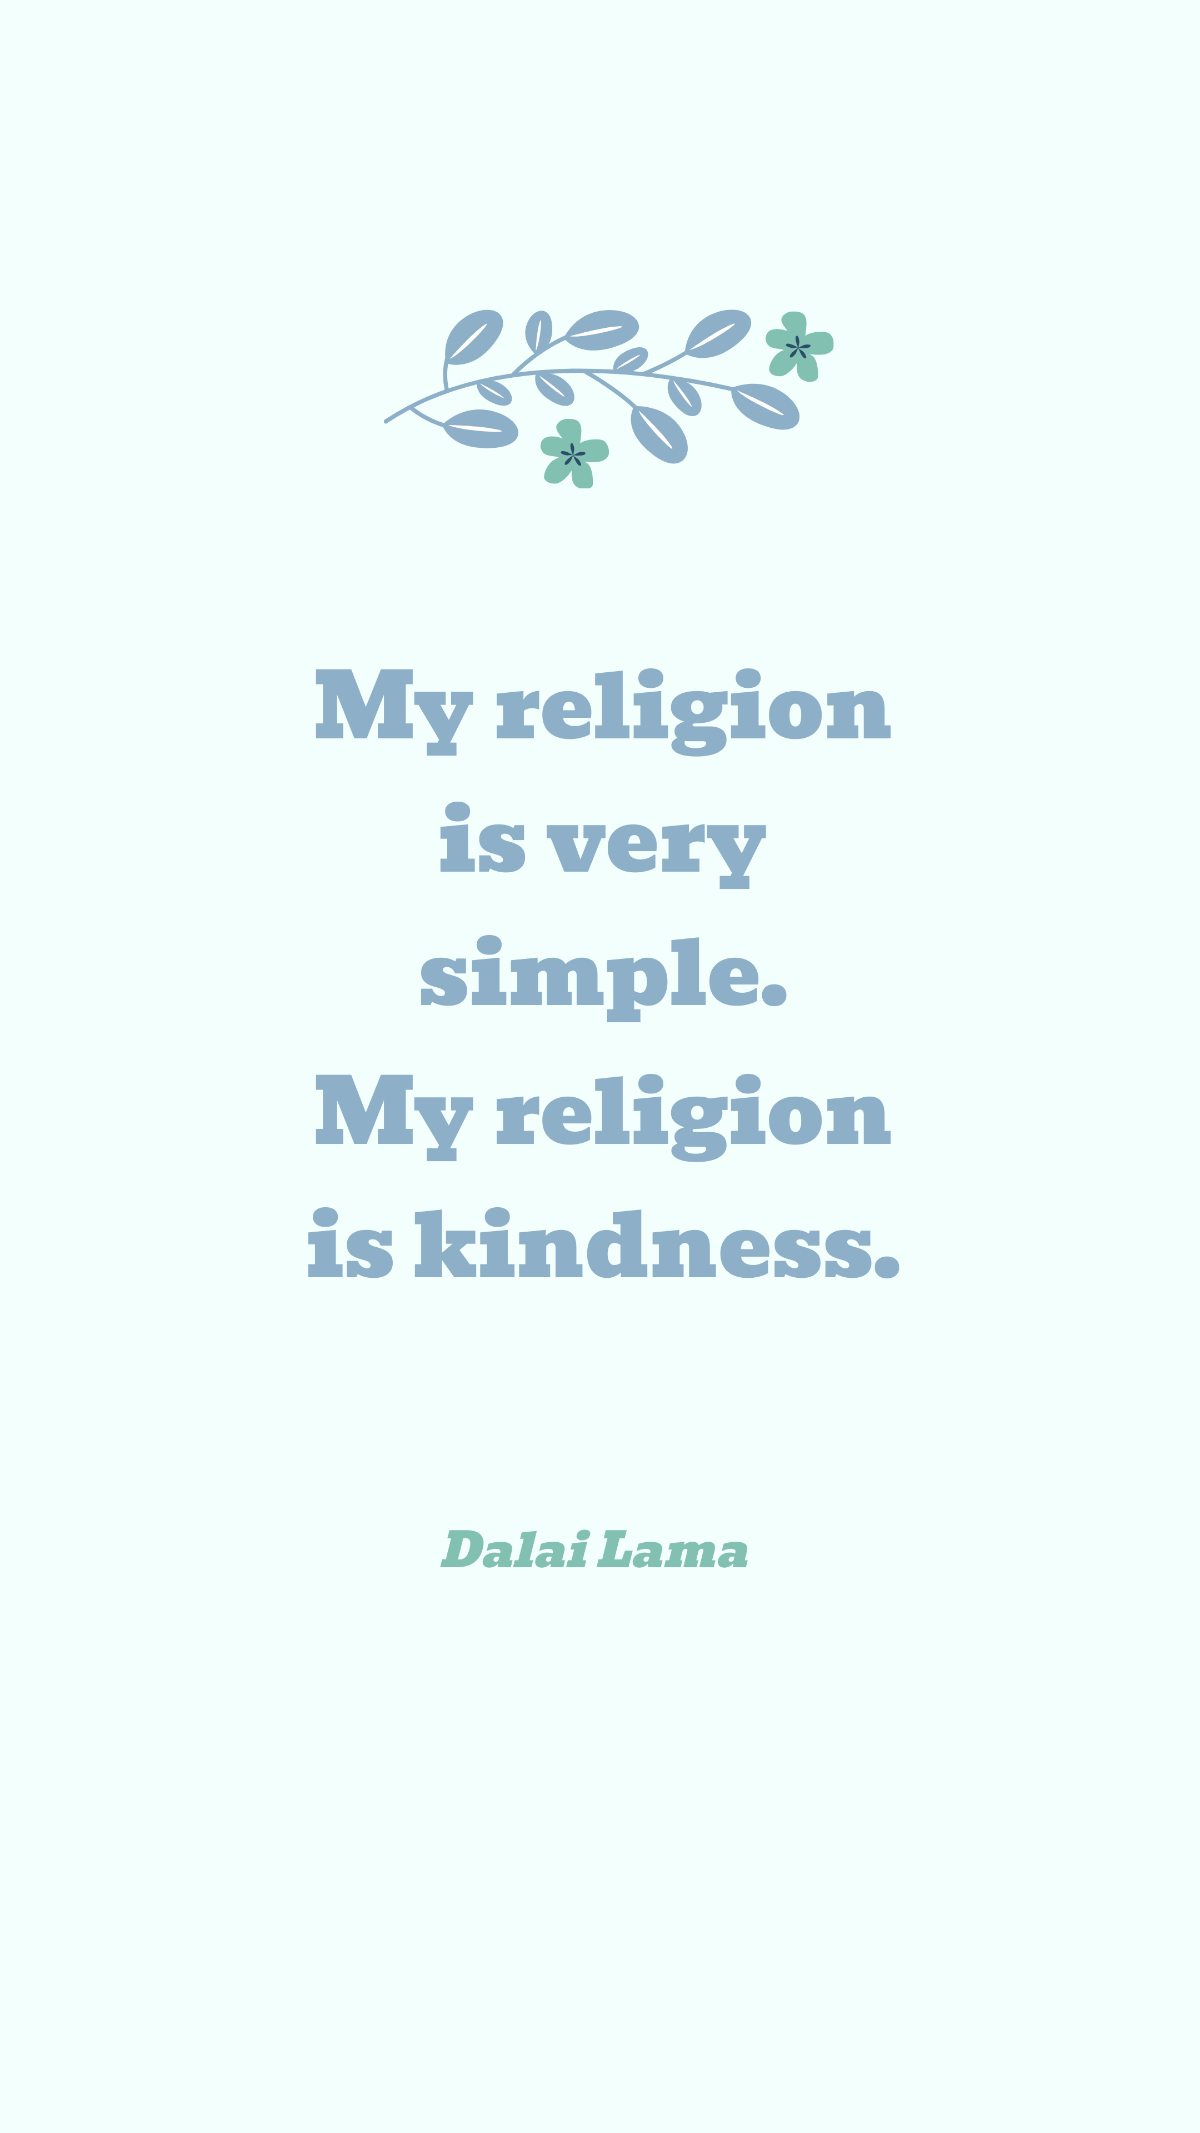 Free Dalai Lama - My religion is very simple. My religion is kindness. Template